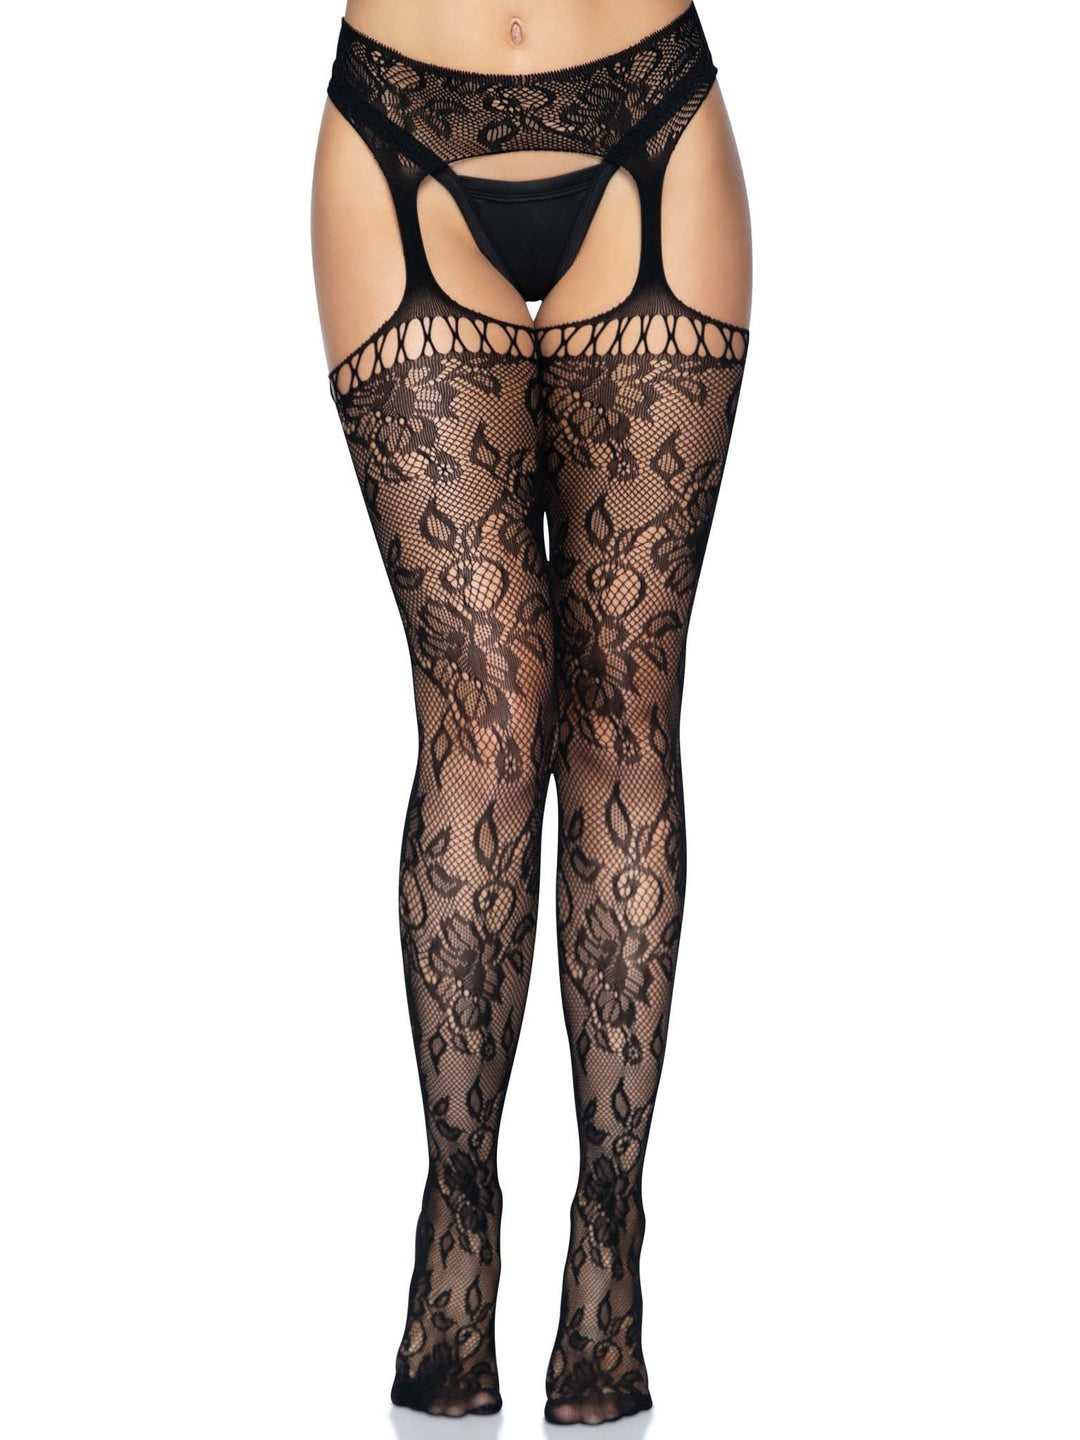 Gardenia Lace Stockings with Netting Top and Attached Garter Belt